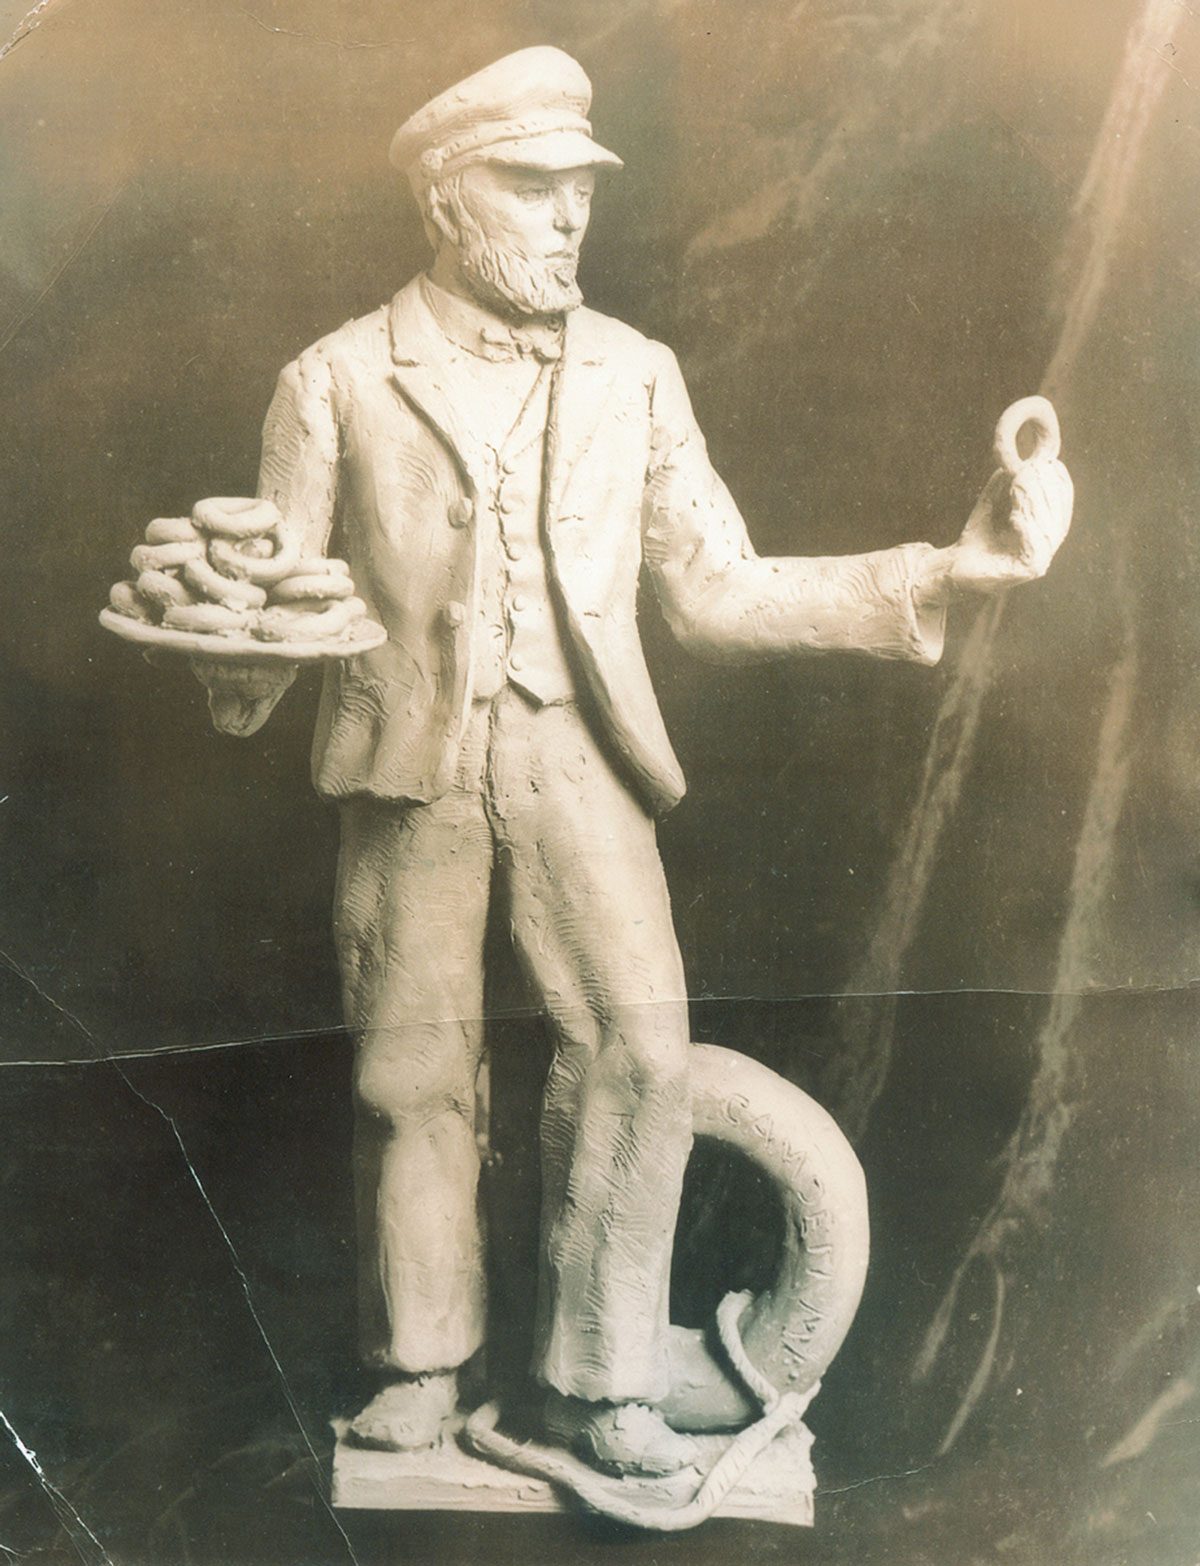 A photograph of a model of a proposed statue of Captain Hanson Crockett Gregory holding a plate of doughnuts by sculptor Victor Khalil, circa 1940.